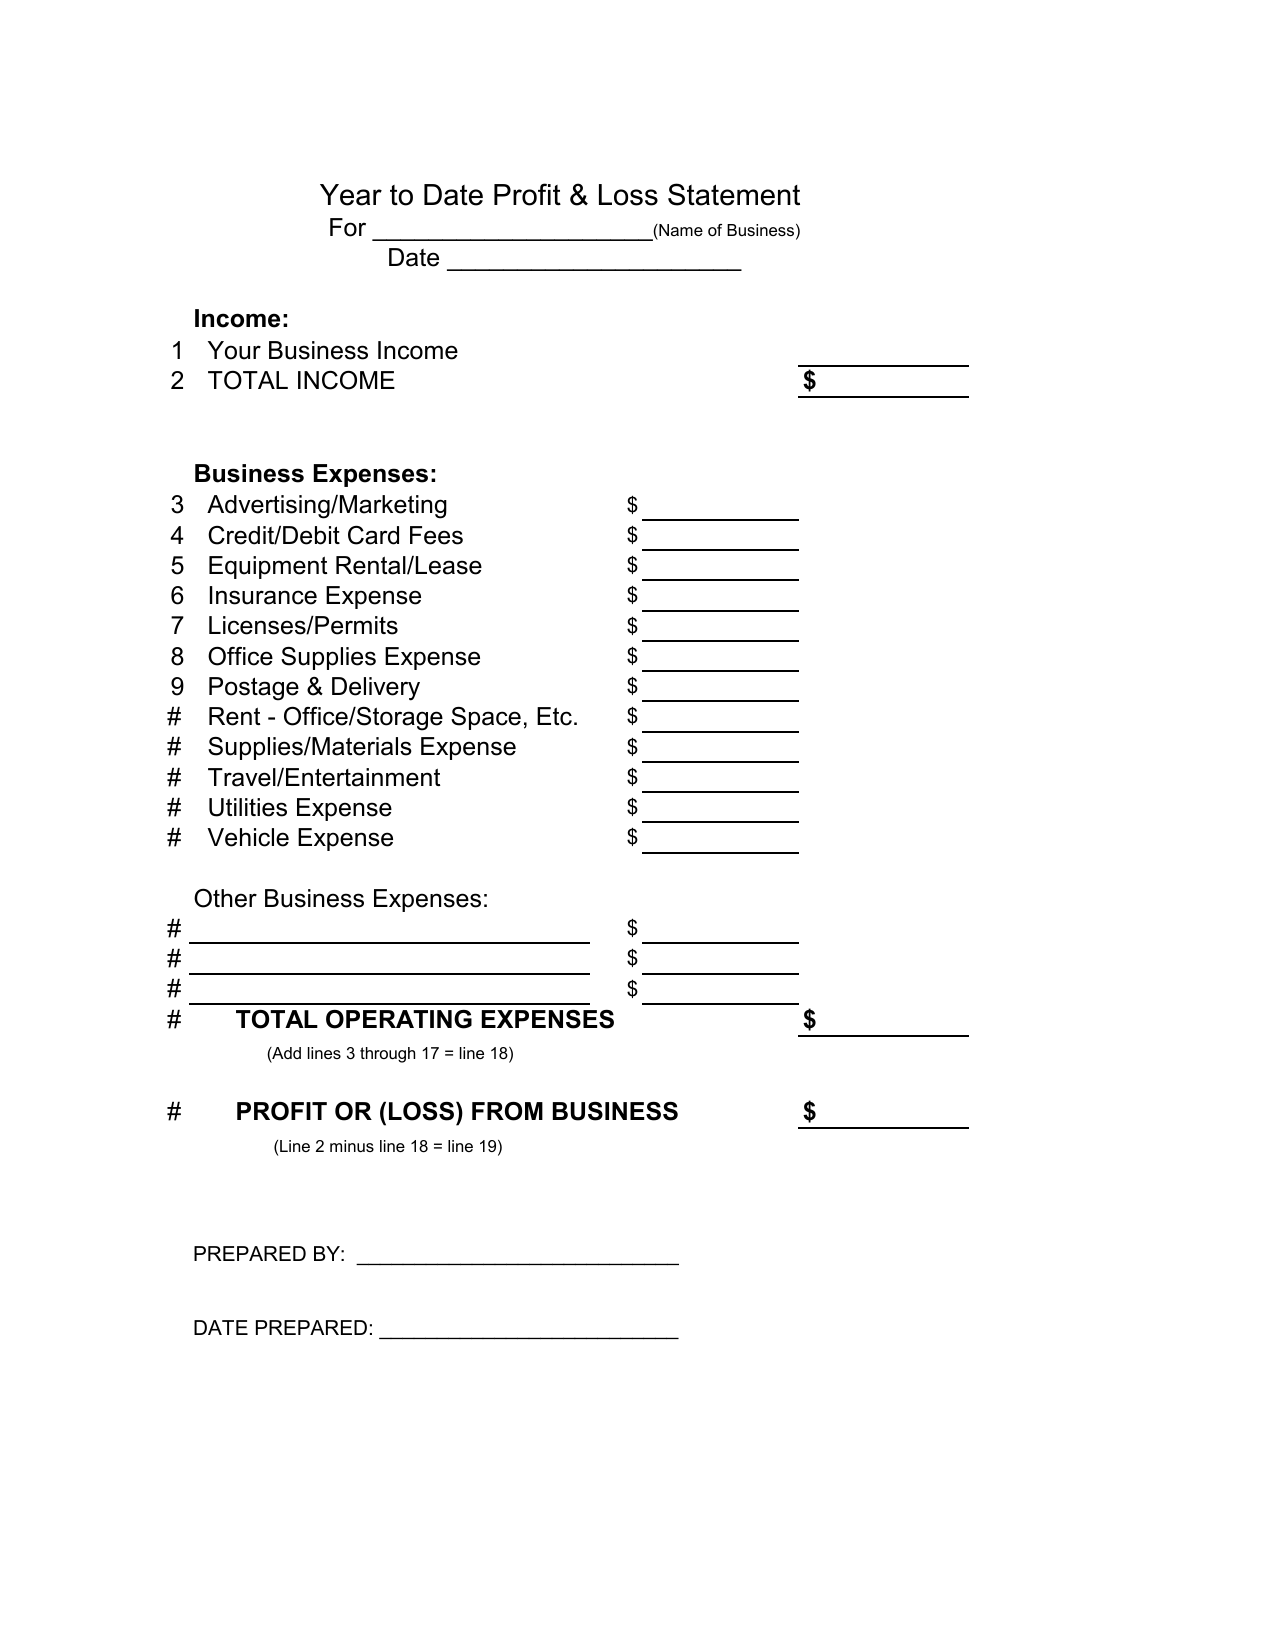 Profit And Loss Statement And Balance Sheet Template from freedownloads.net